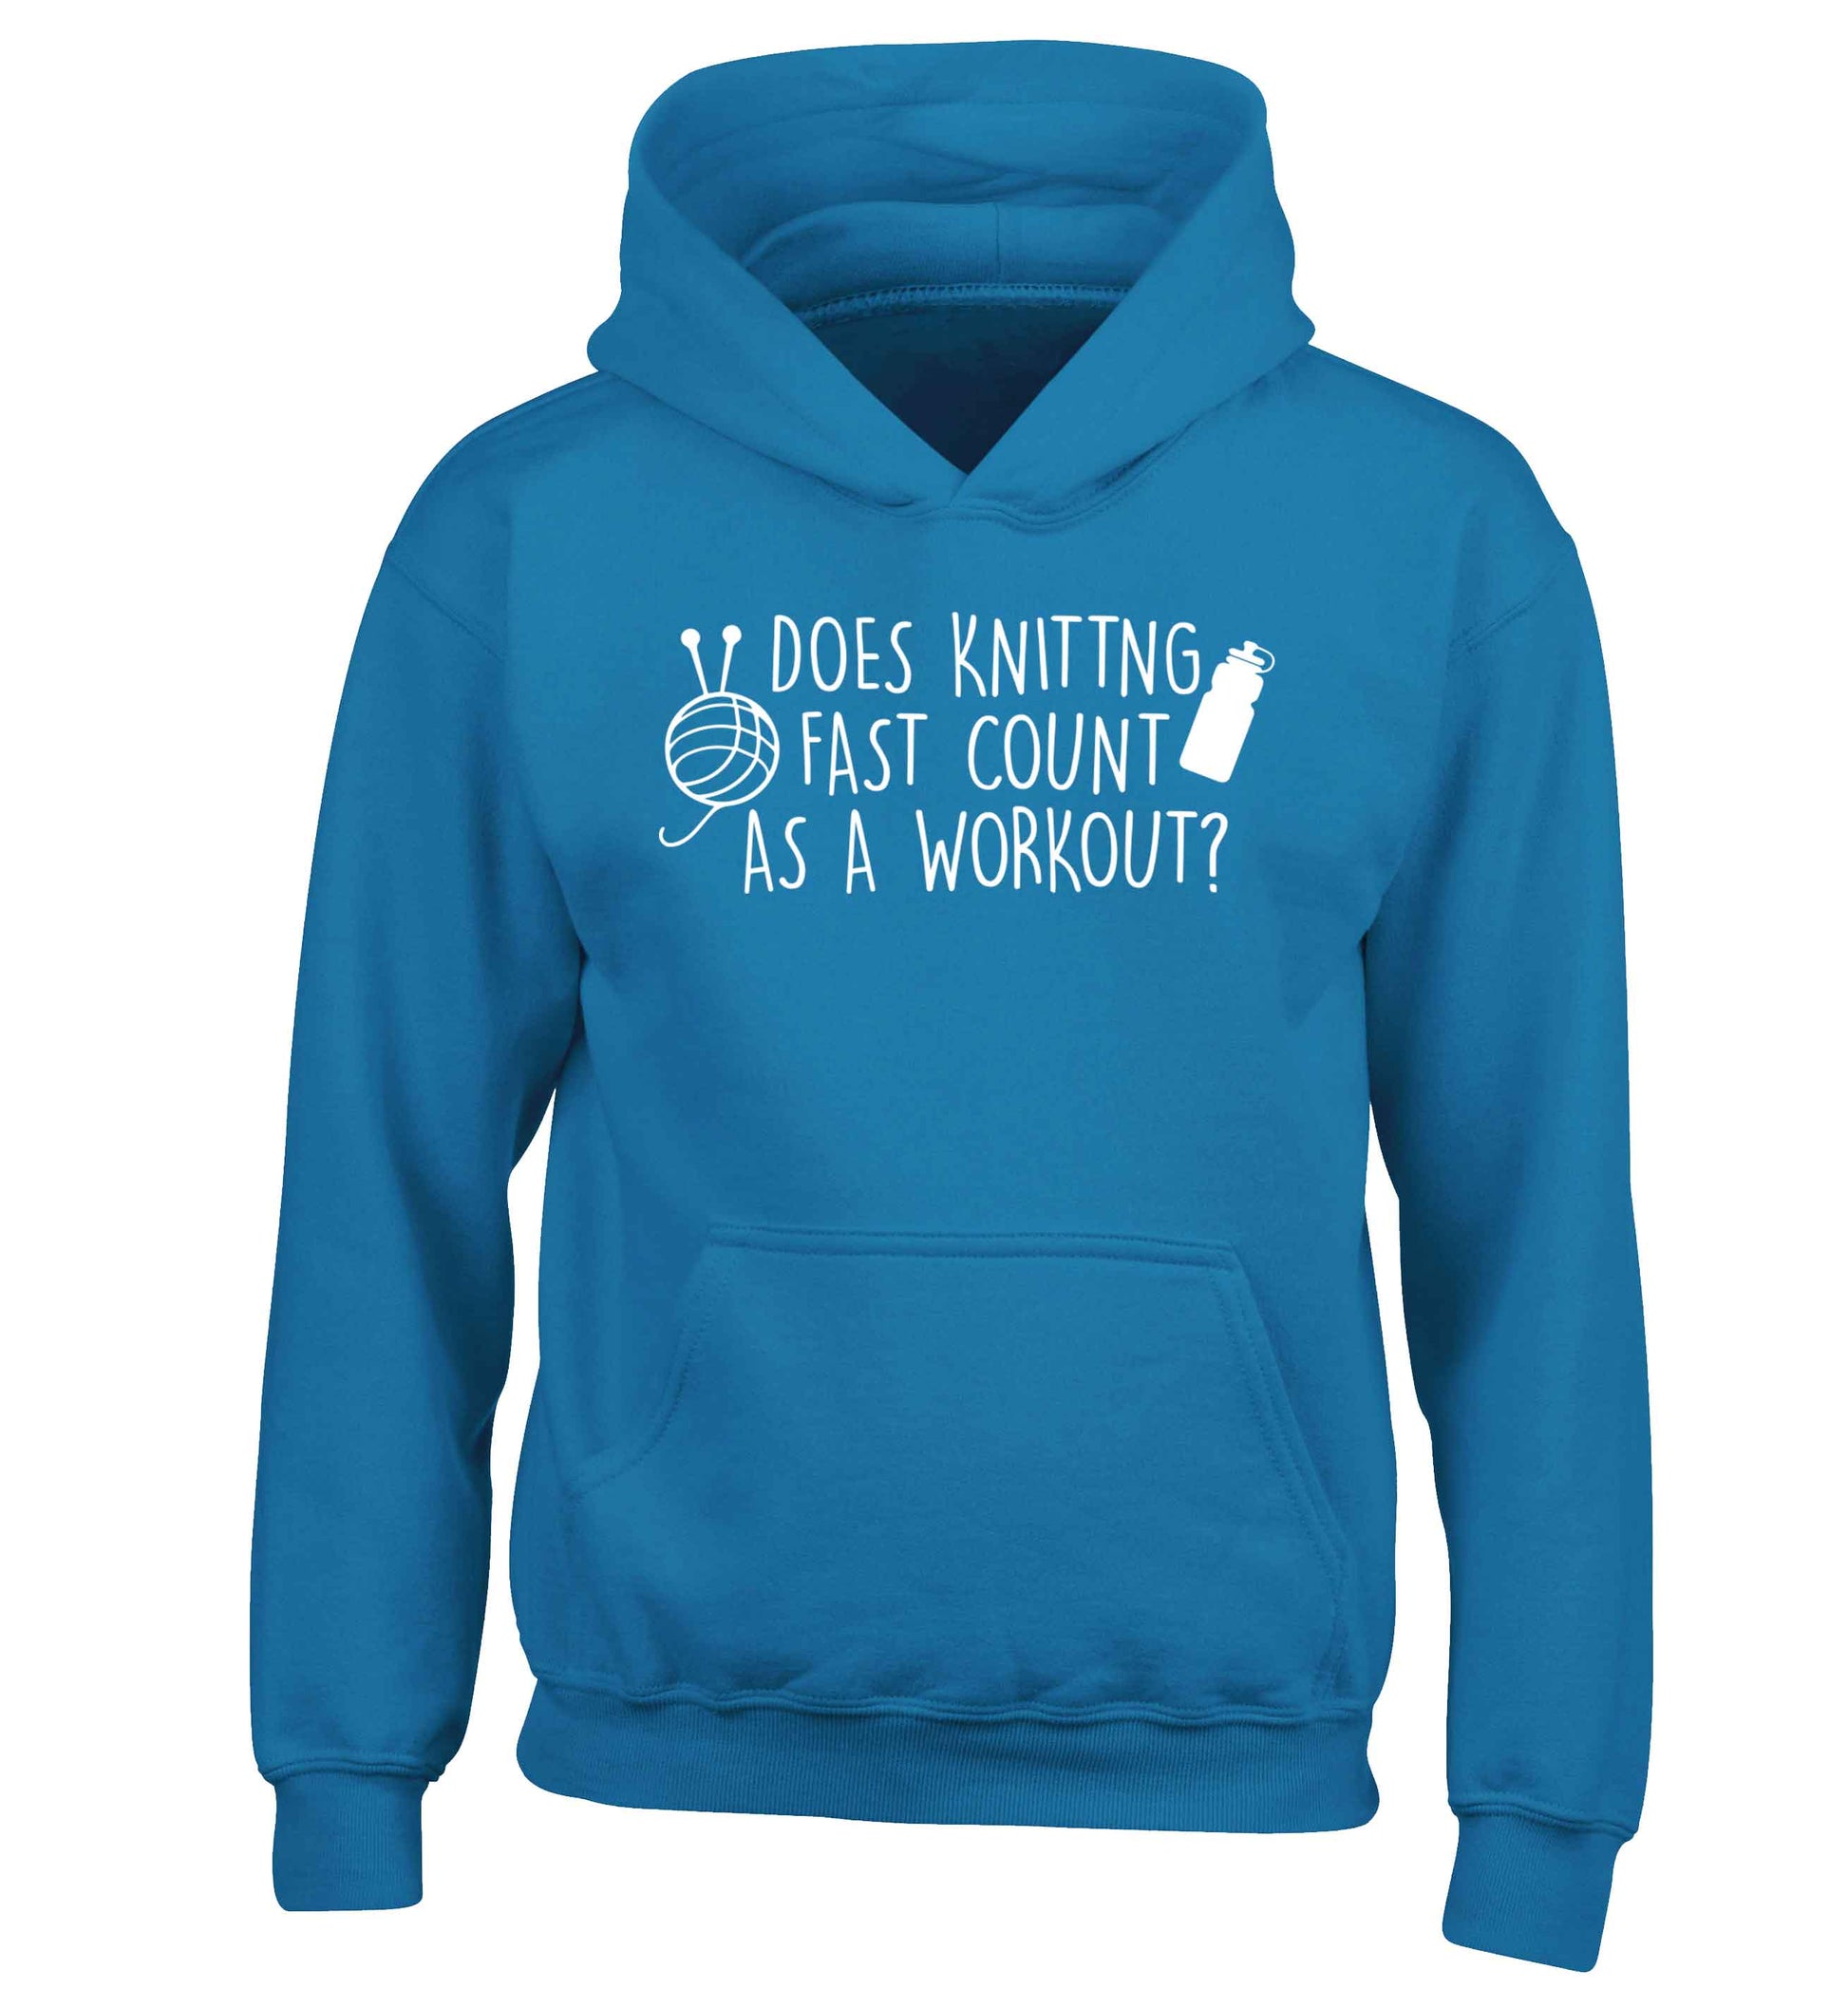 Does knitting fast count as a workout? children's blue hoodie 12-13 Years